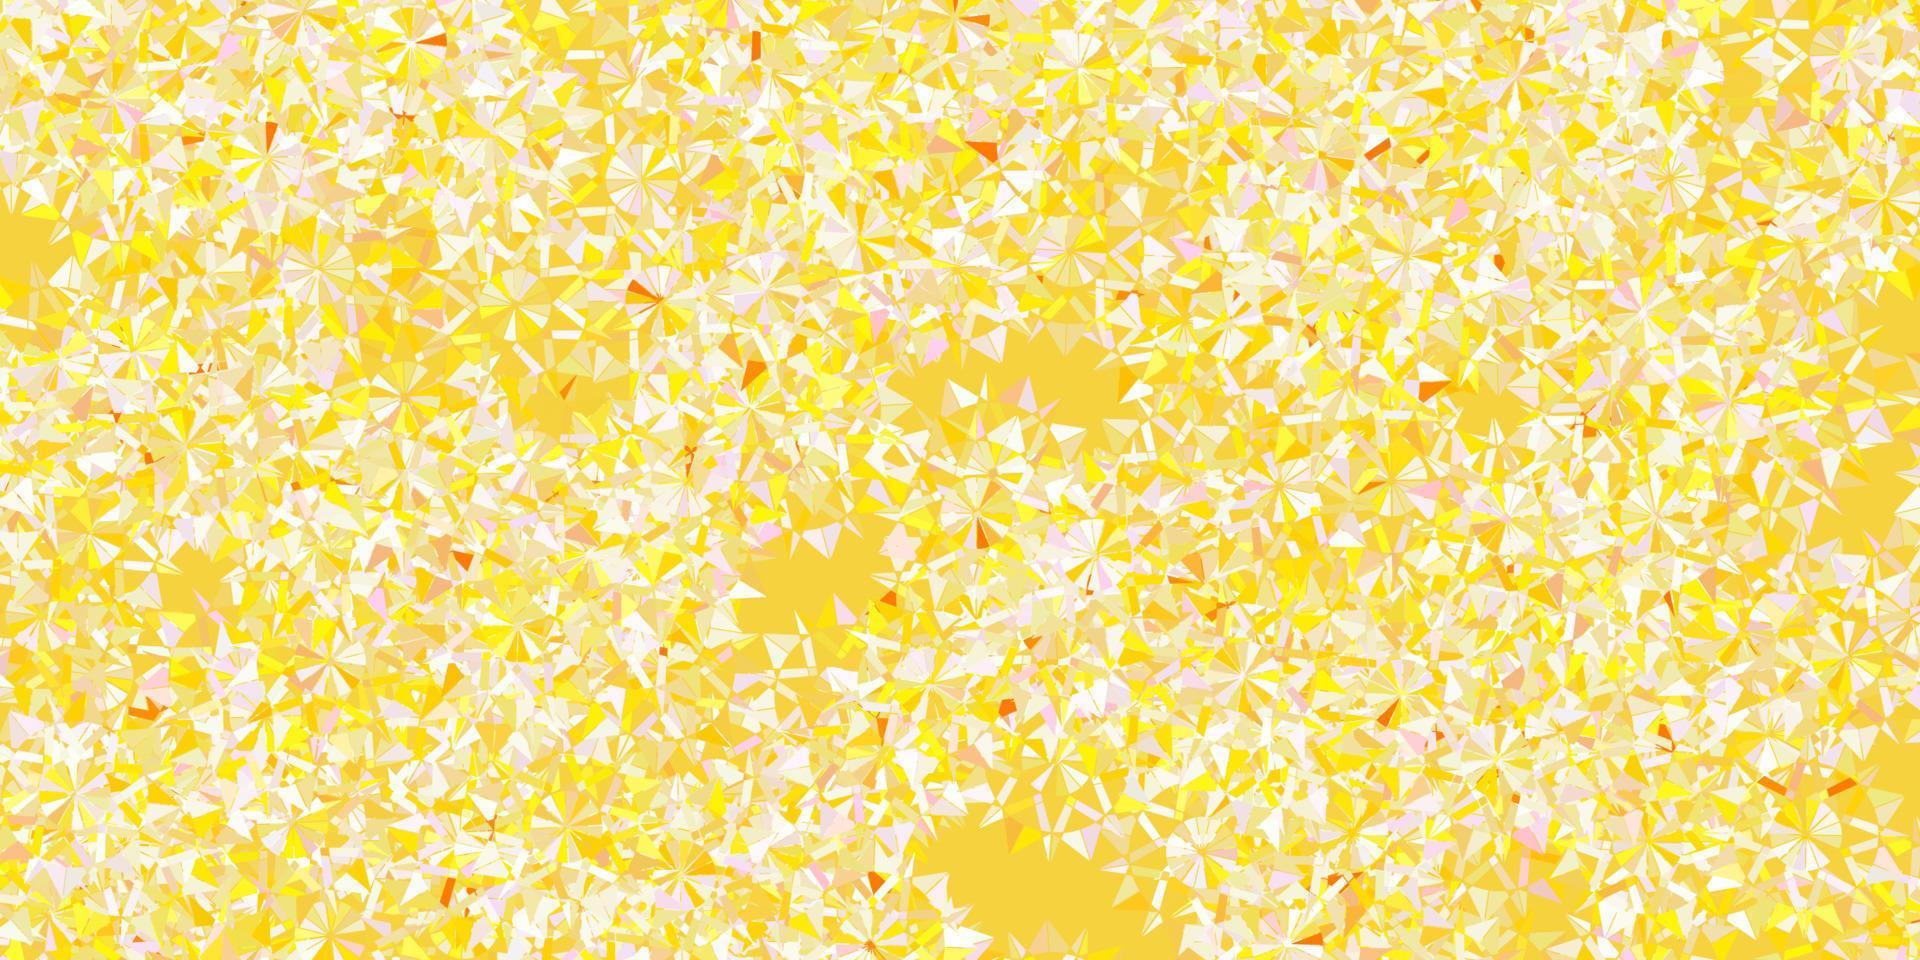 Light pink, yellow vector pattern with colored snowflakes.